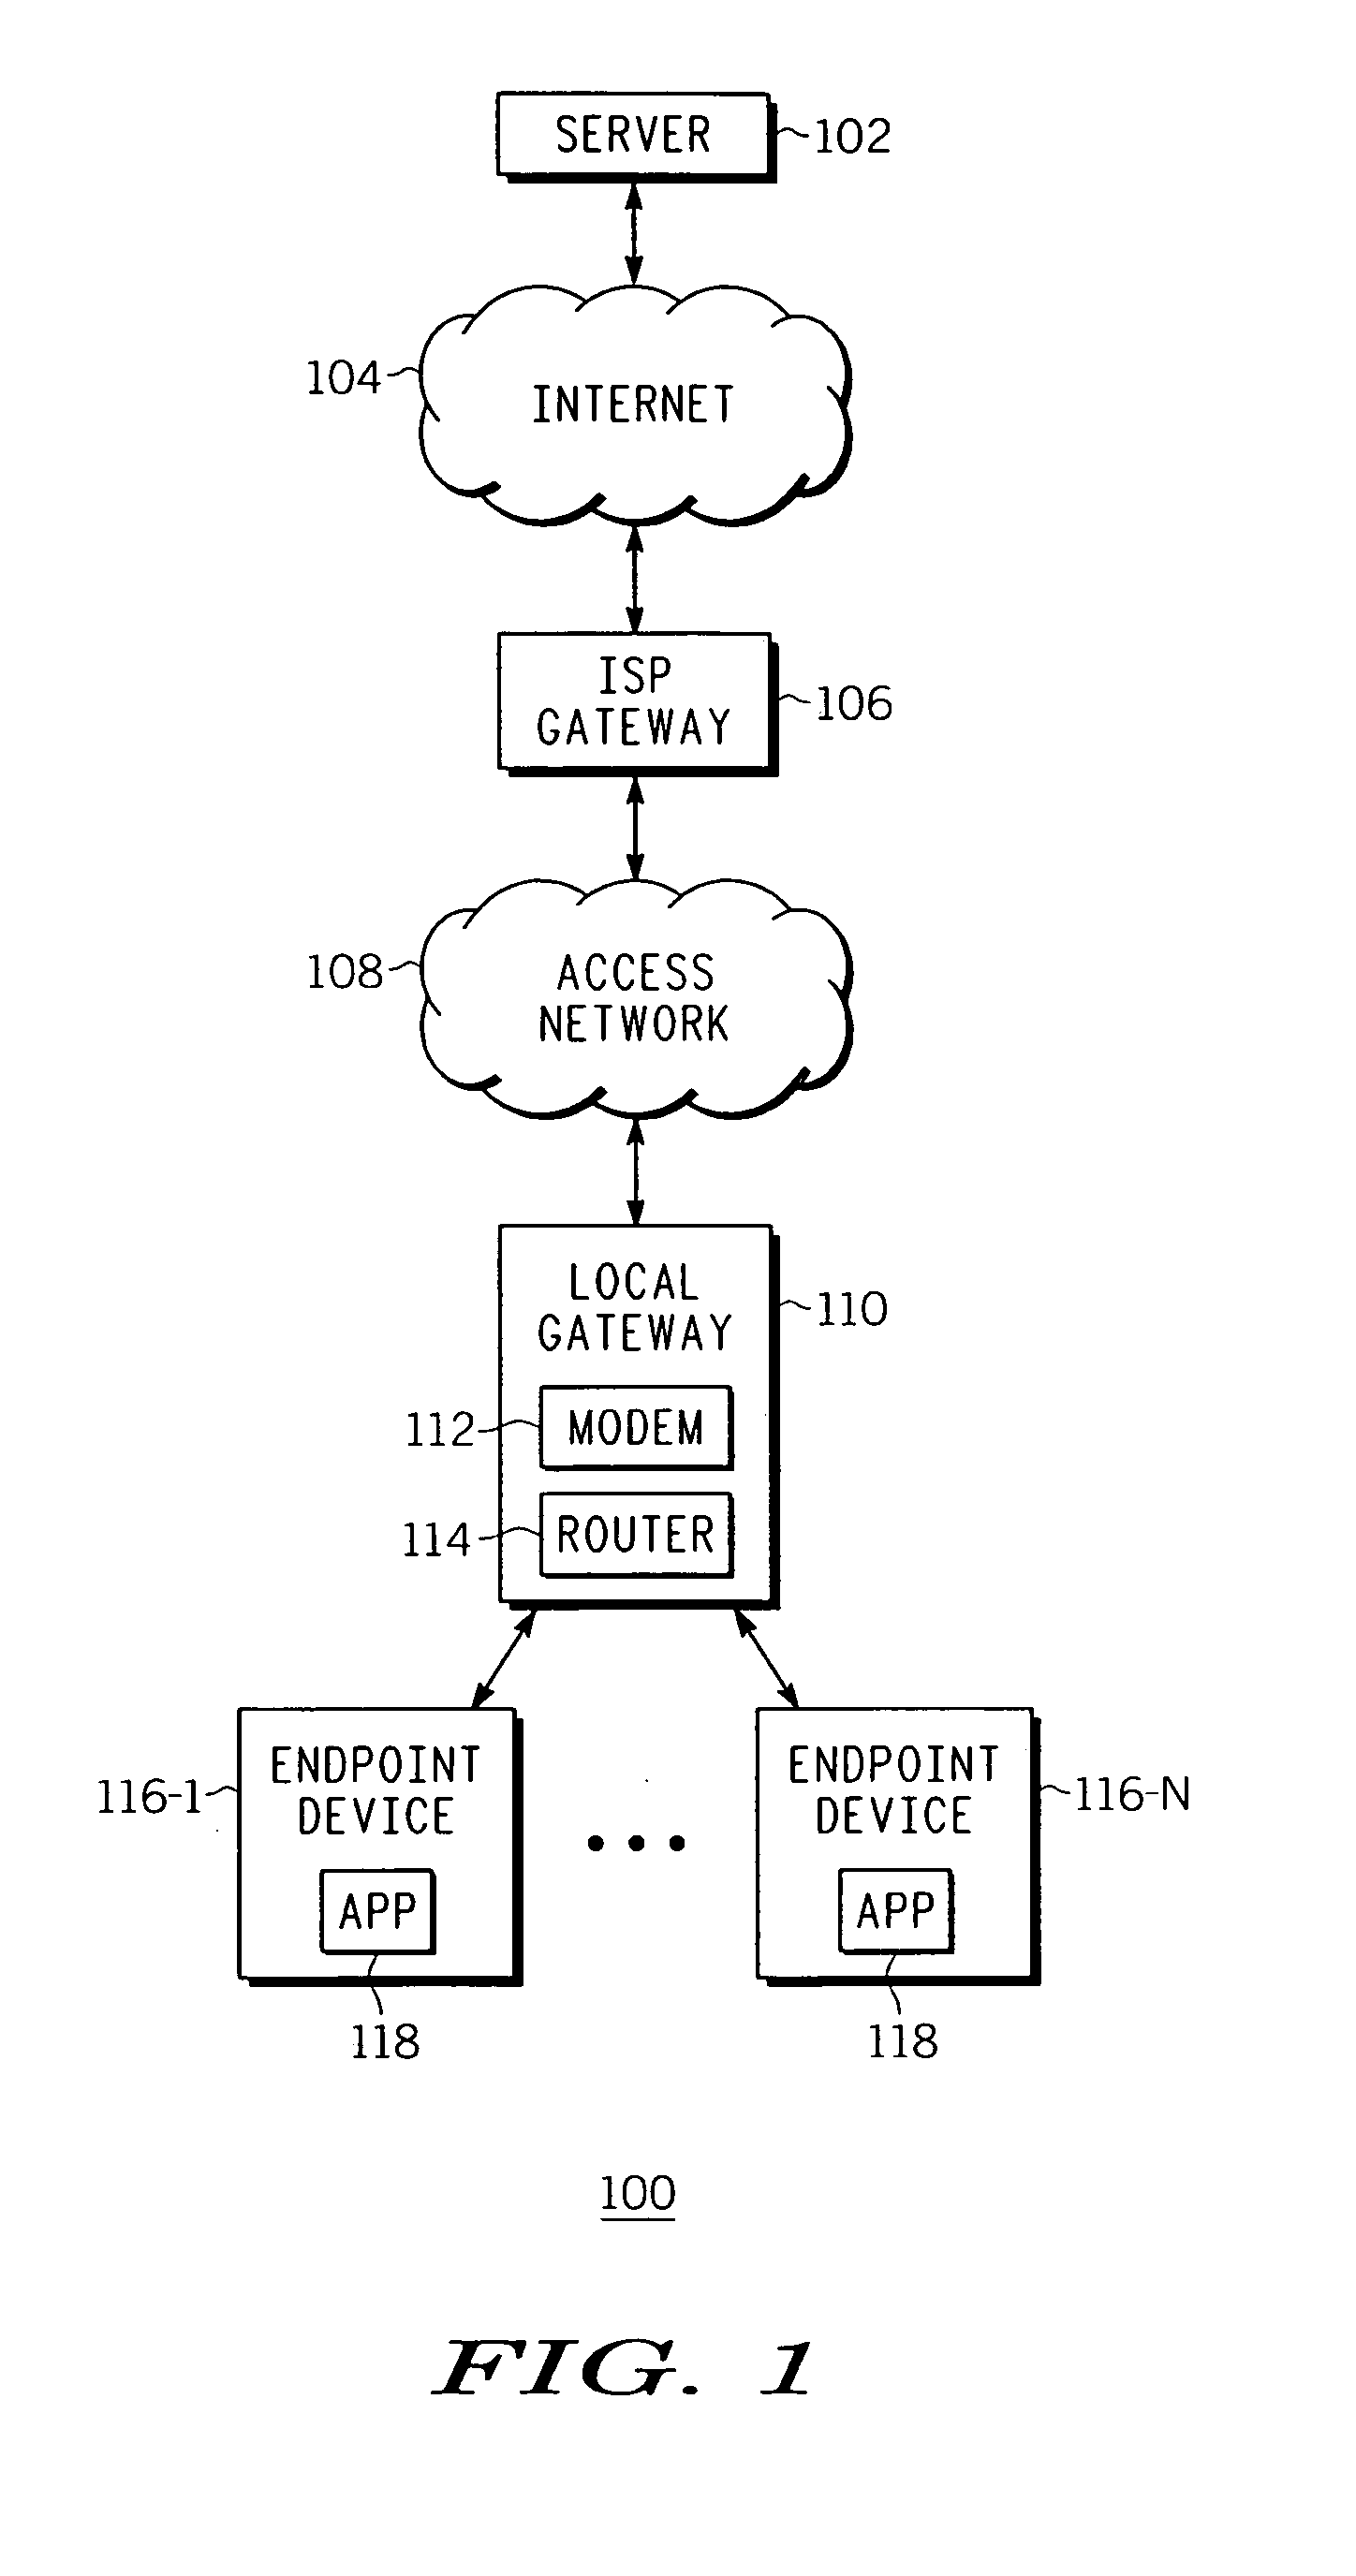 Method and apparatus for testing for open ports of an endpoint device in a packet network